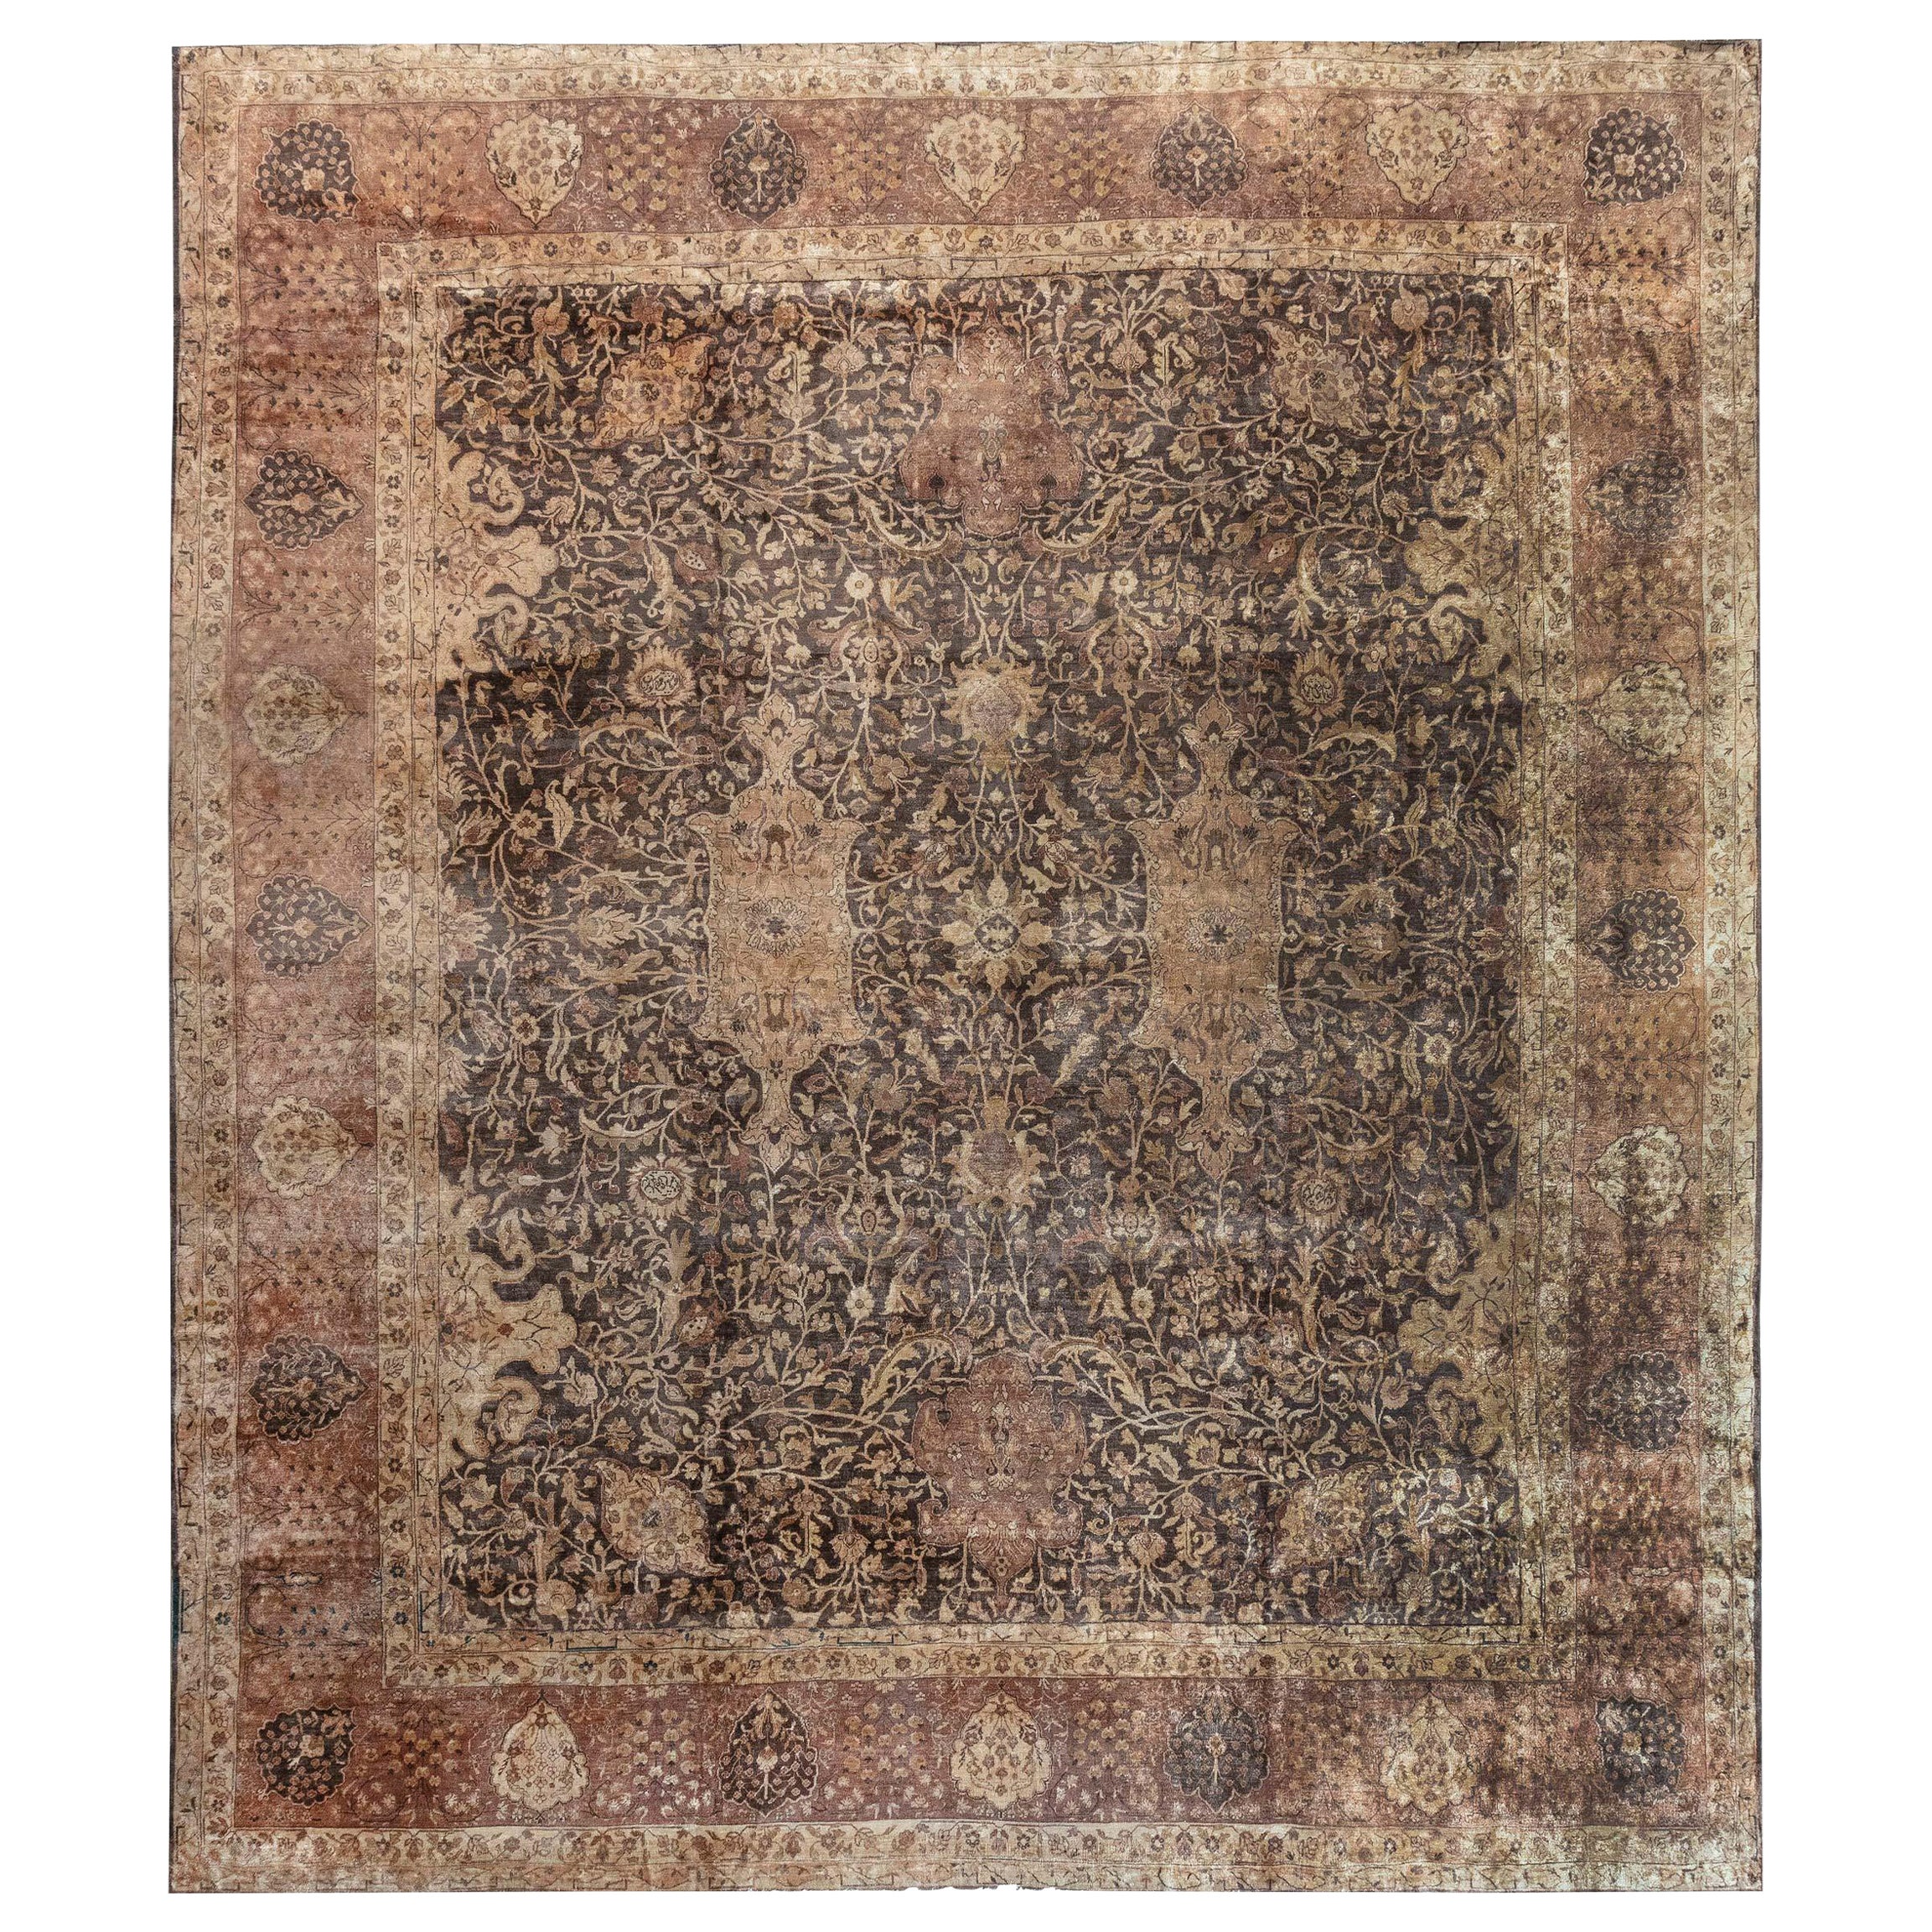 Early 20th Century Indian Chocolate Brown Handmade Wool Carpet (Size Adjusted)